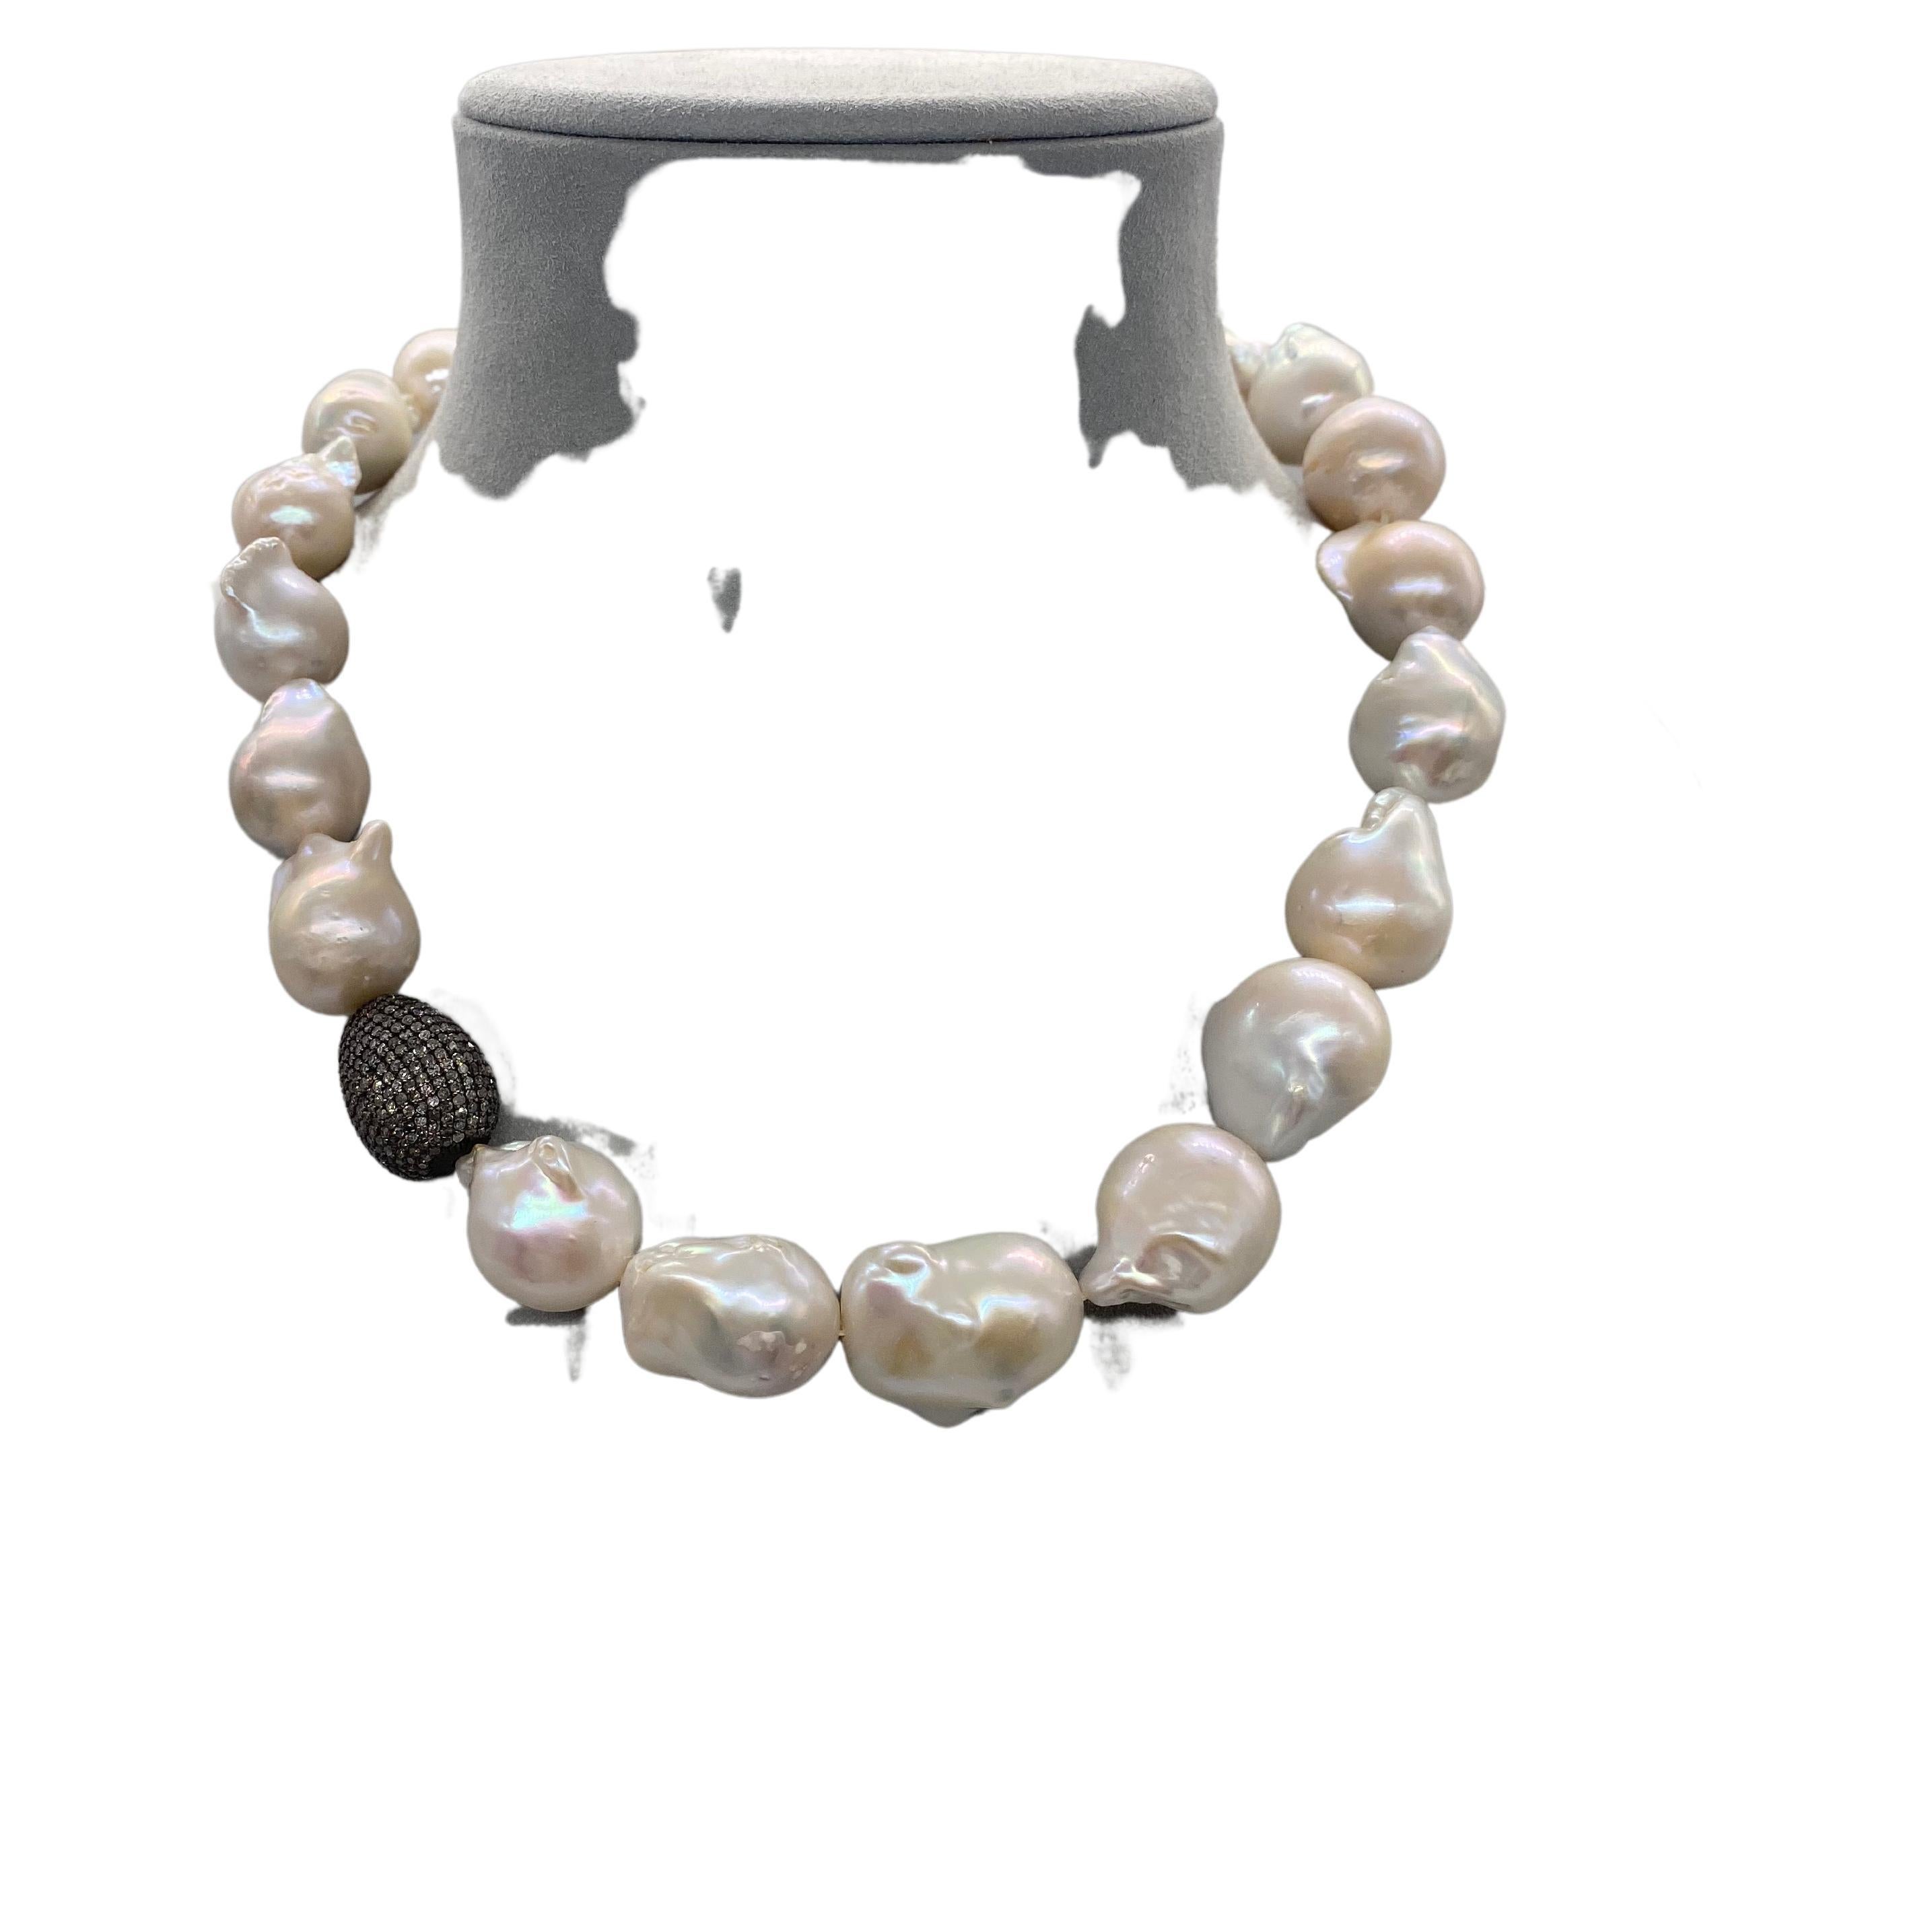 Baroque pearls come from the South Seas, where nature creates underwater treasures of striking beauty. Their soft, organic irregular shape adds a captivating dimension to these necklaces. The iridescence of the pearls gracefully reflects the full